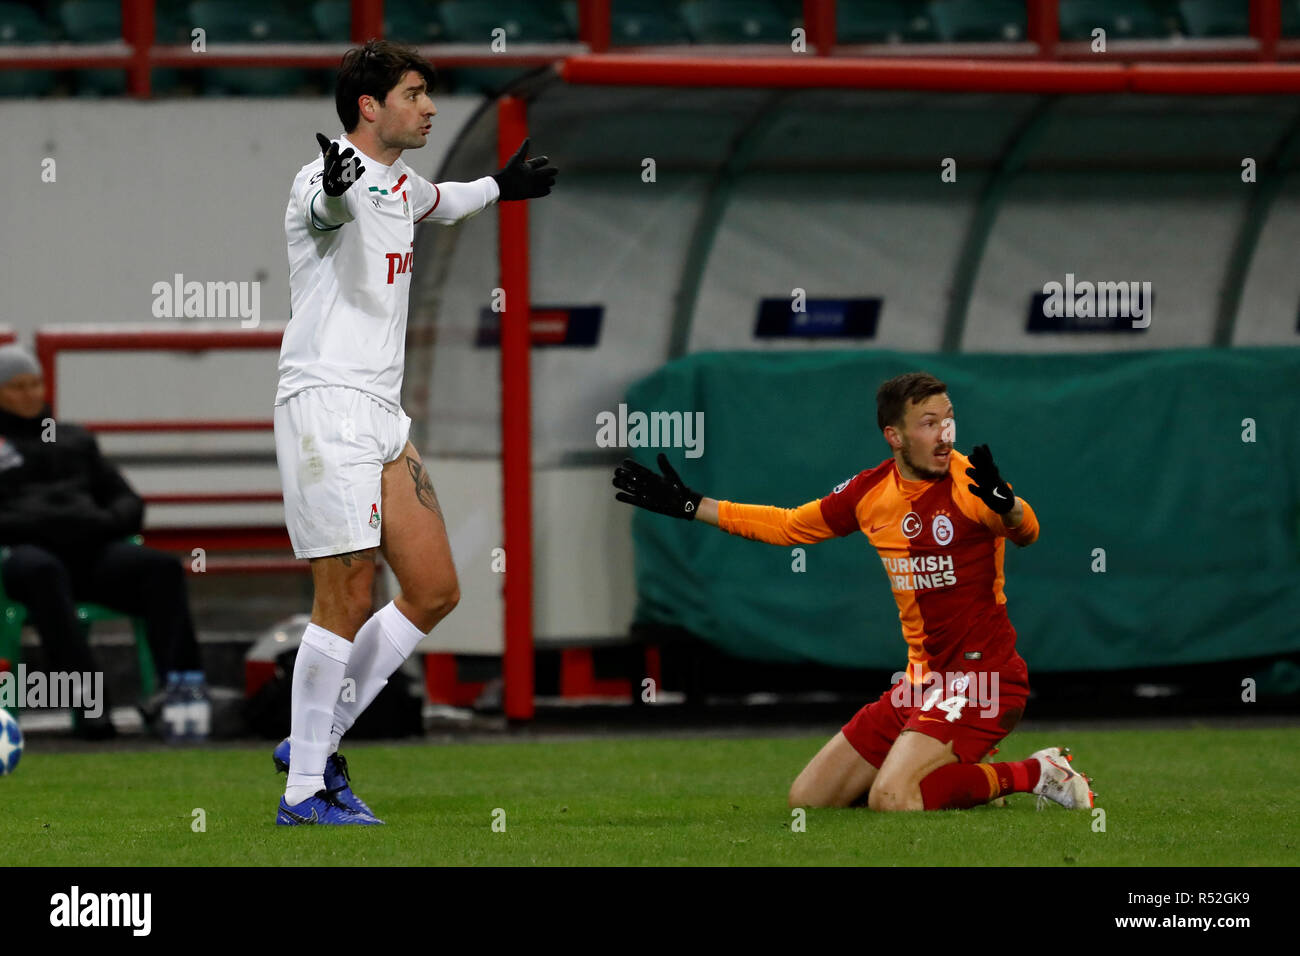 MOSCOW, RUSSIA - NOVEMBER 28: Vedran Corluka (L) of FC Lokomotiv Moscow and Martin Linnes of Galatasaray react during the Group D match of the UEFA Champions League between FC Lokomotiv Moscow and Galatasaray at Lokomotiv Stadium on November 28, 2018 in Moscow, Russia. (MB Media) Stock Photo